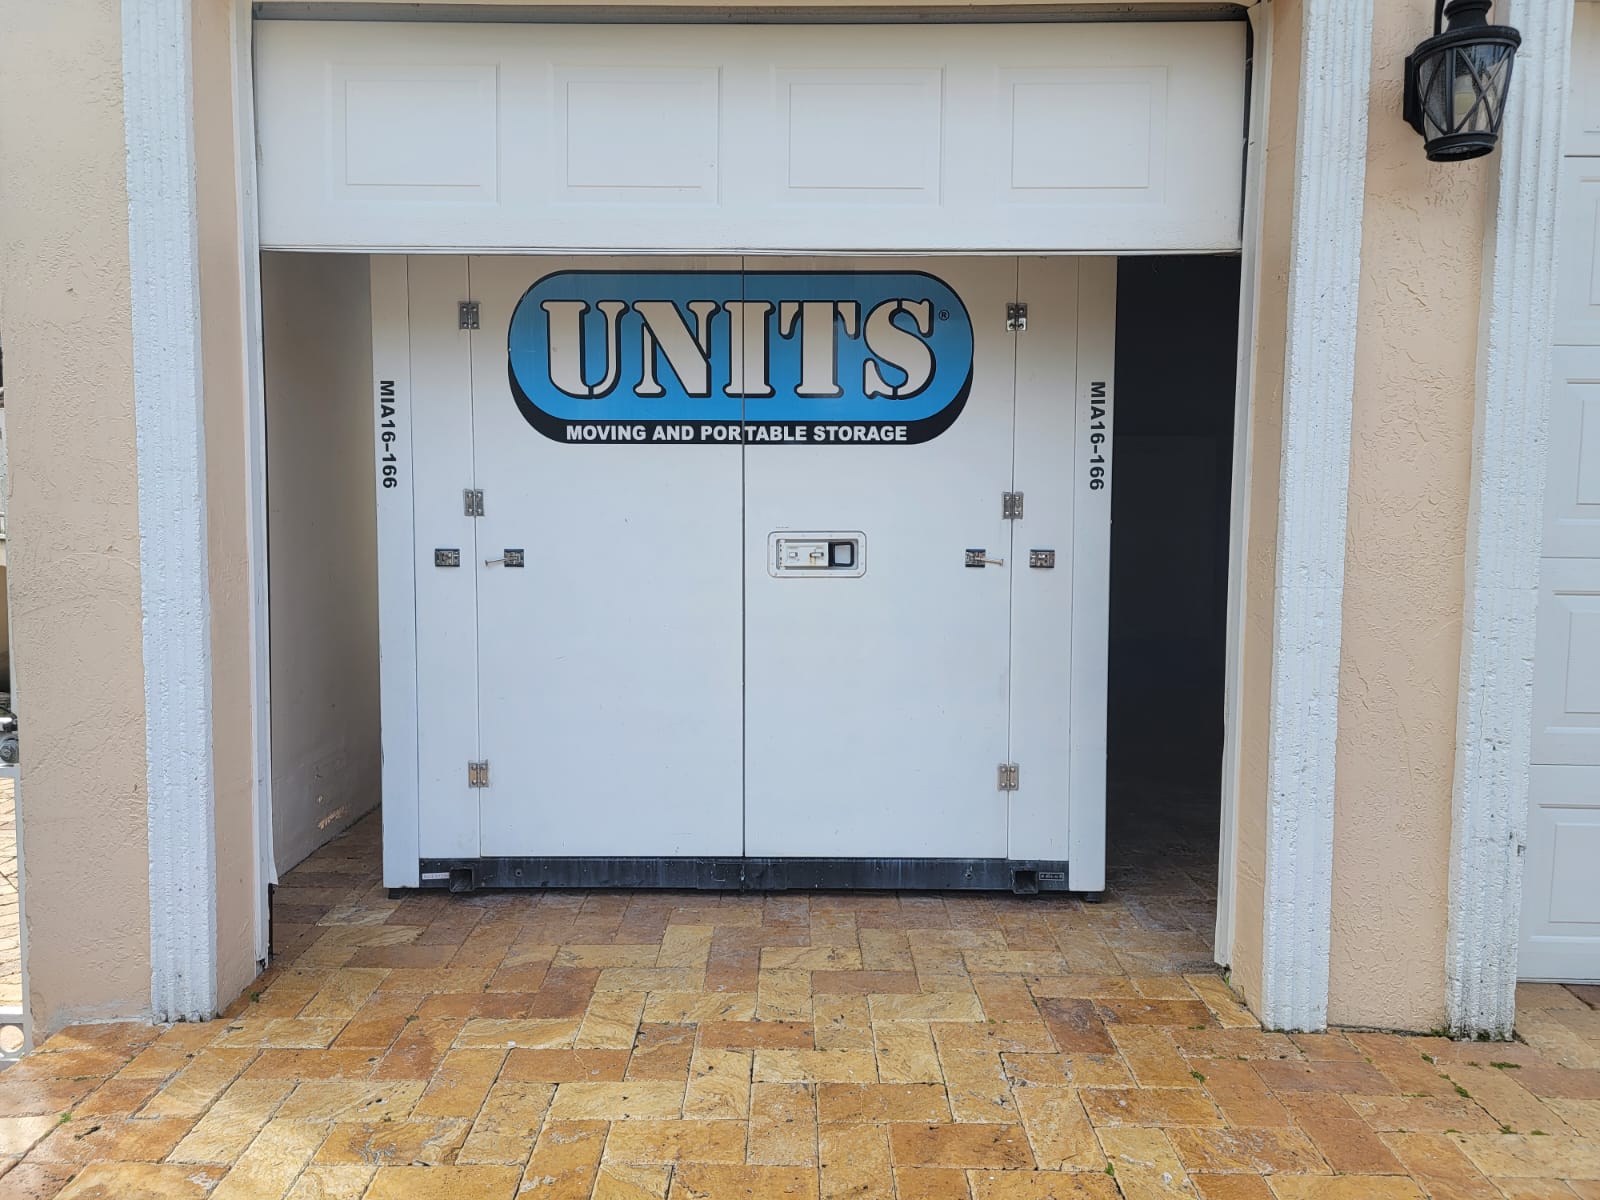 UNITS Moving and Portable Storage of Miami container in a garage.